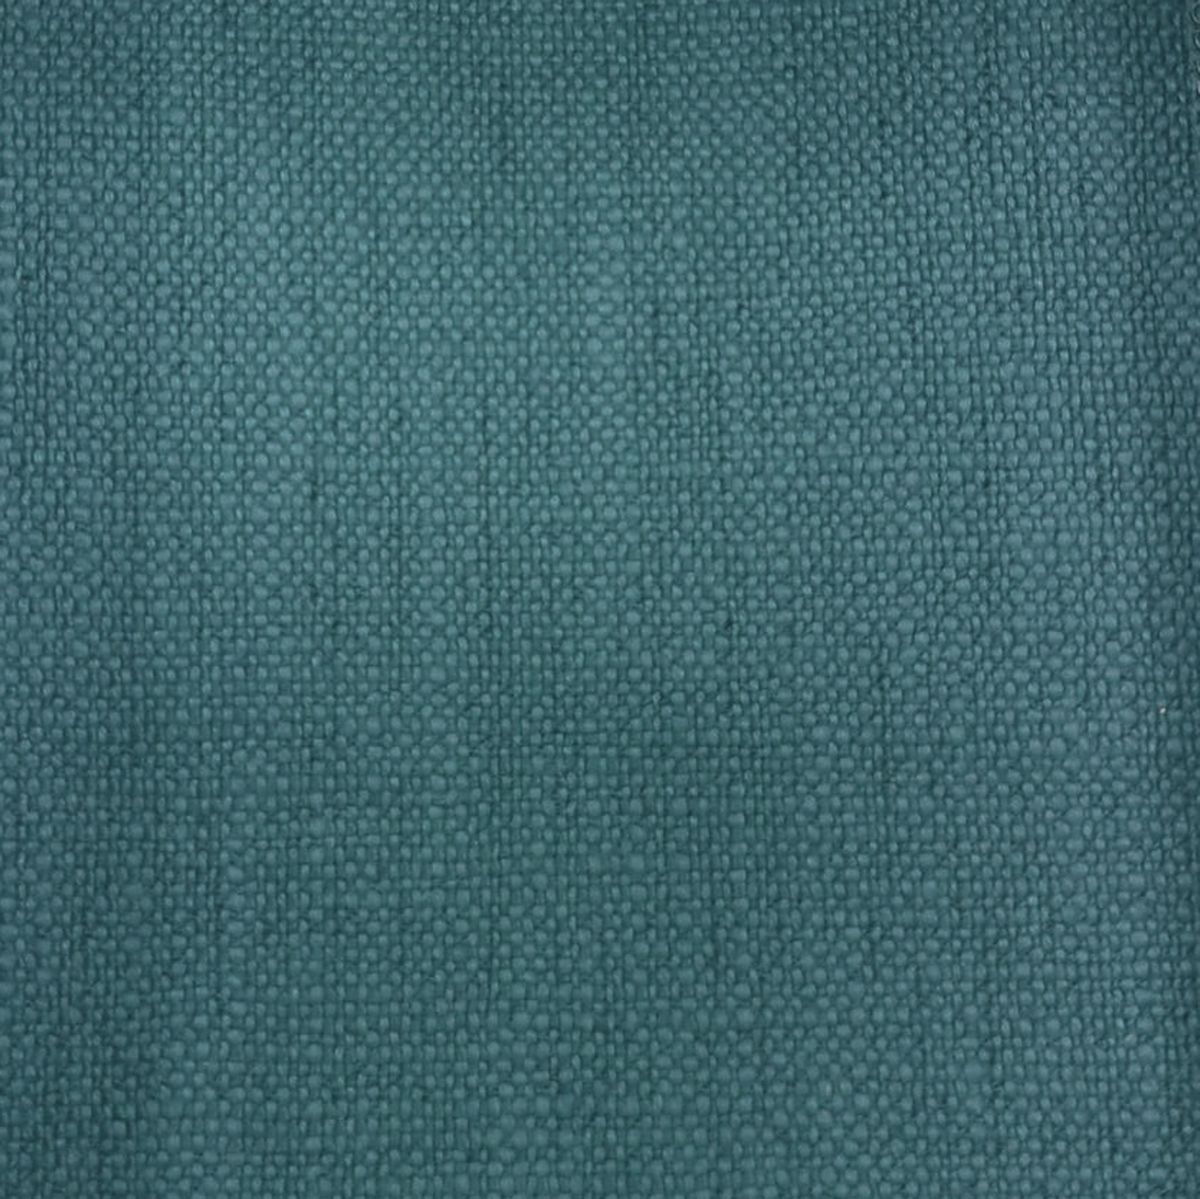 Trento Teal Fabric by Voyage Maison